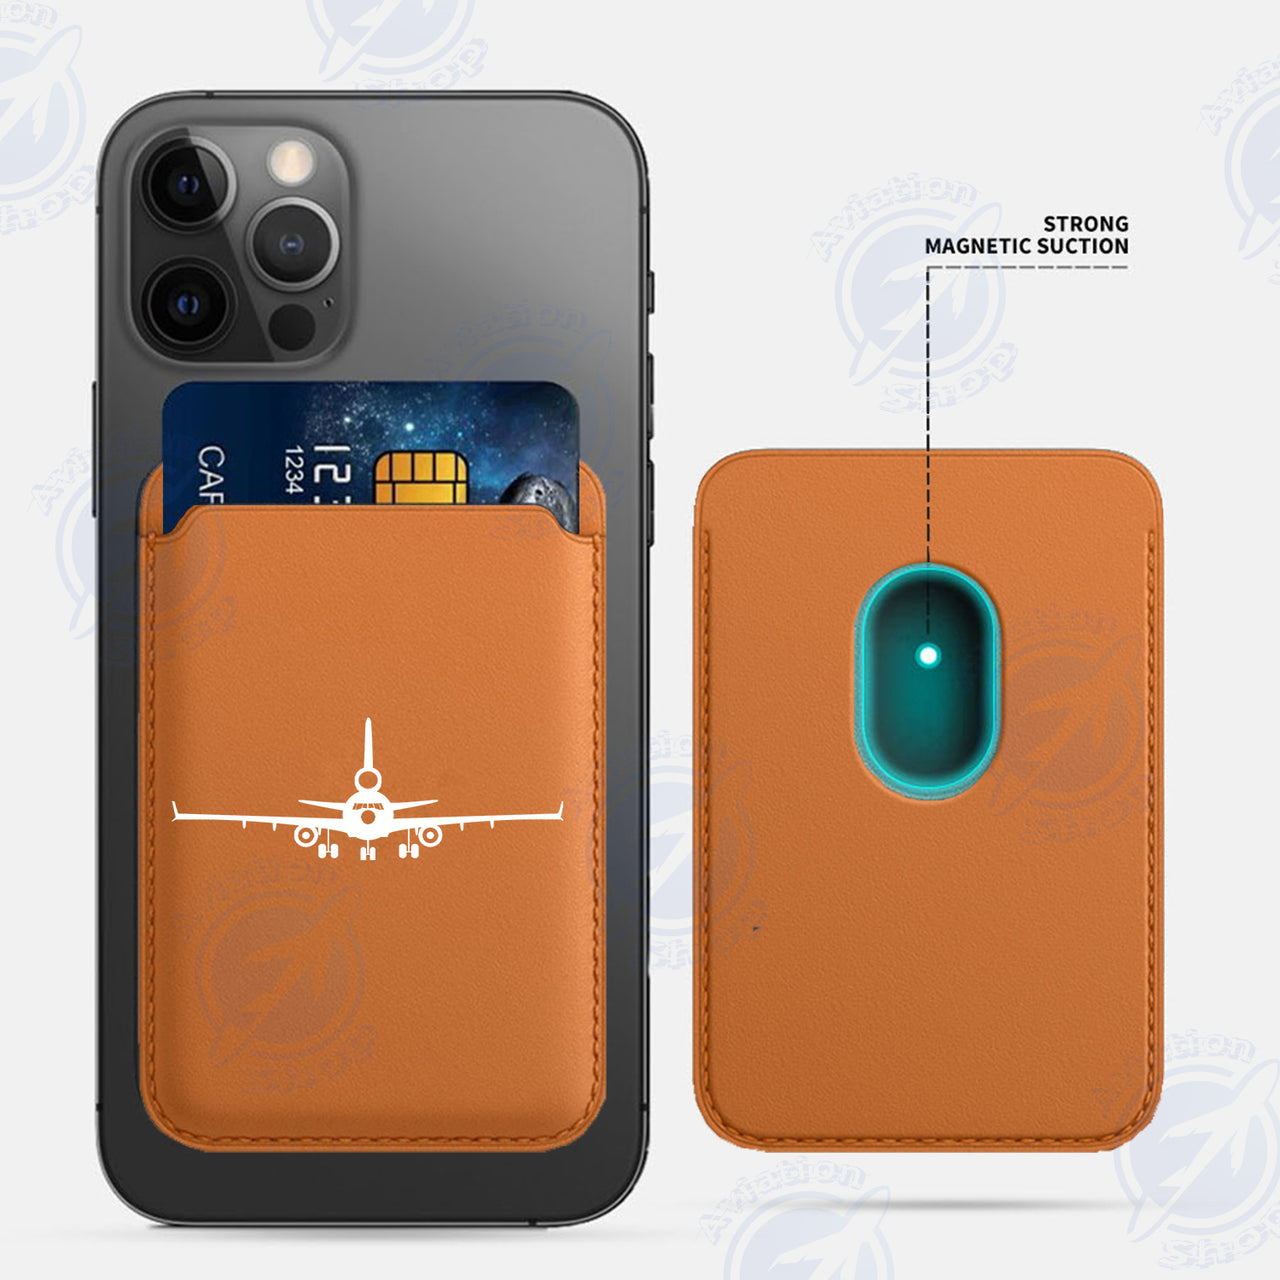 McDonnell Douglas MD-11 Silhouette Plane iPhone Cases Magnetic Card Wallet